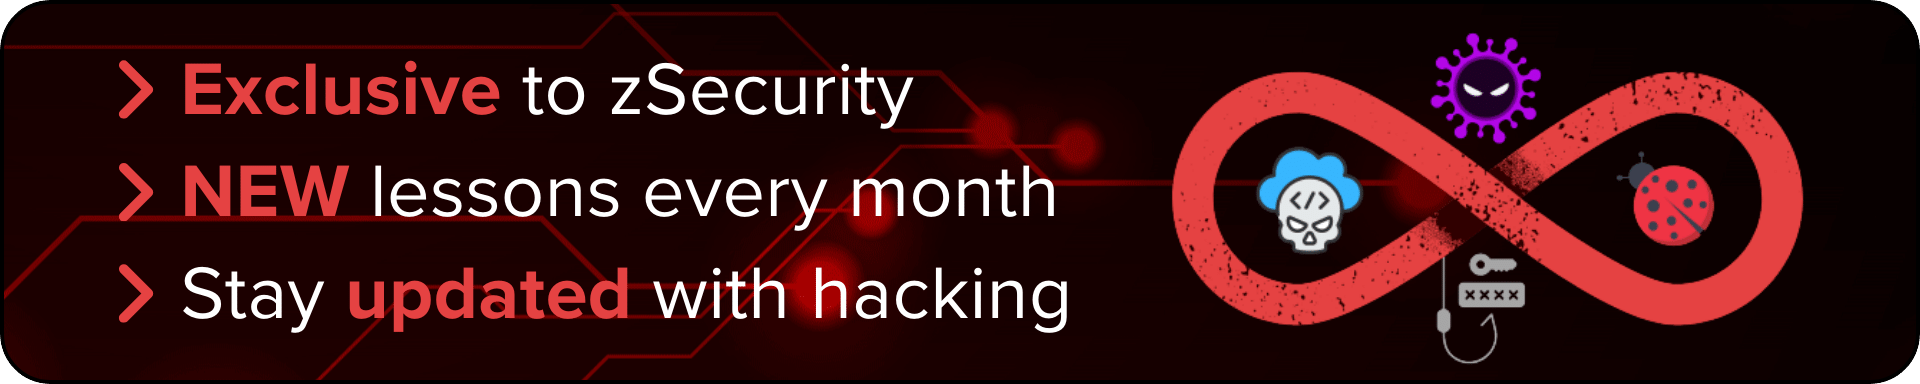 Displays a banner image for the Hacking Masterclass. On the right is an infinity symbol with various hacking related icons around it including a bug (for bug bounty), a virus, a skull with a cloud (cloud hacking) and a fishing line hook (for phishing). On the left contains the wording "Exclusive to zSecurity" "NEW lessons every month" and "Stay updated with hacking"